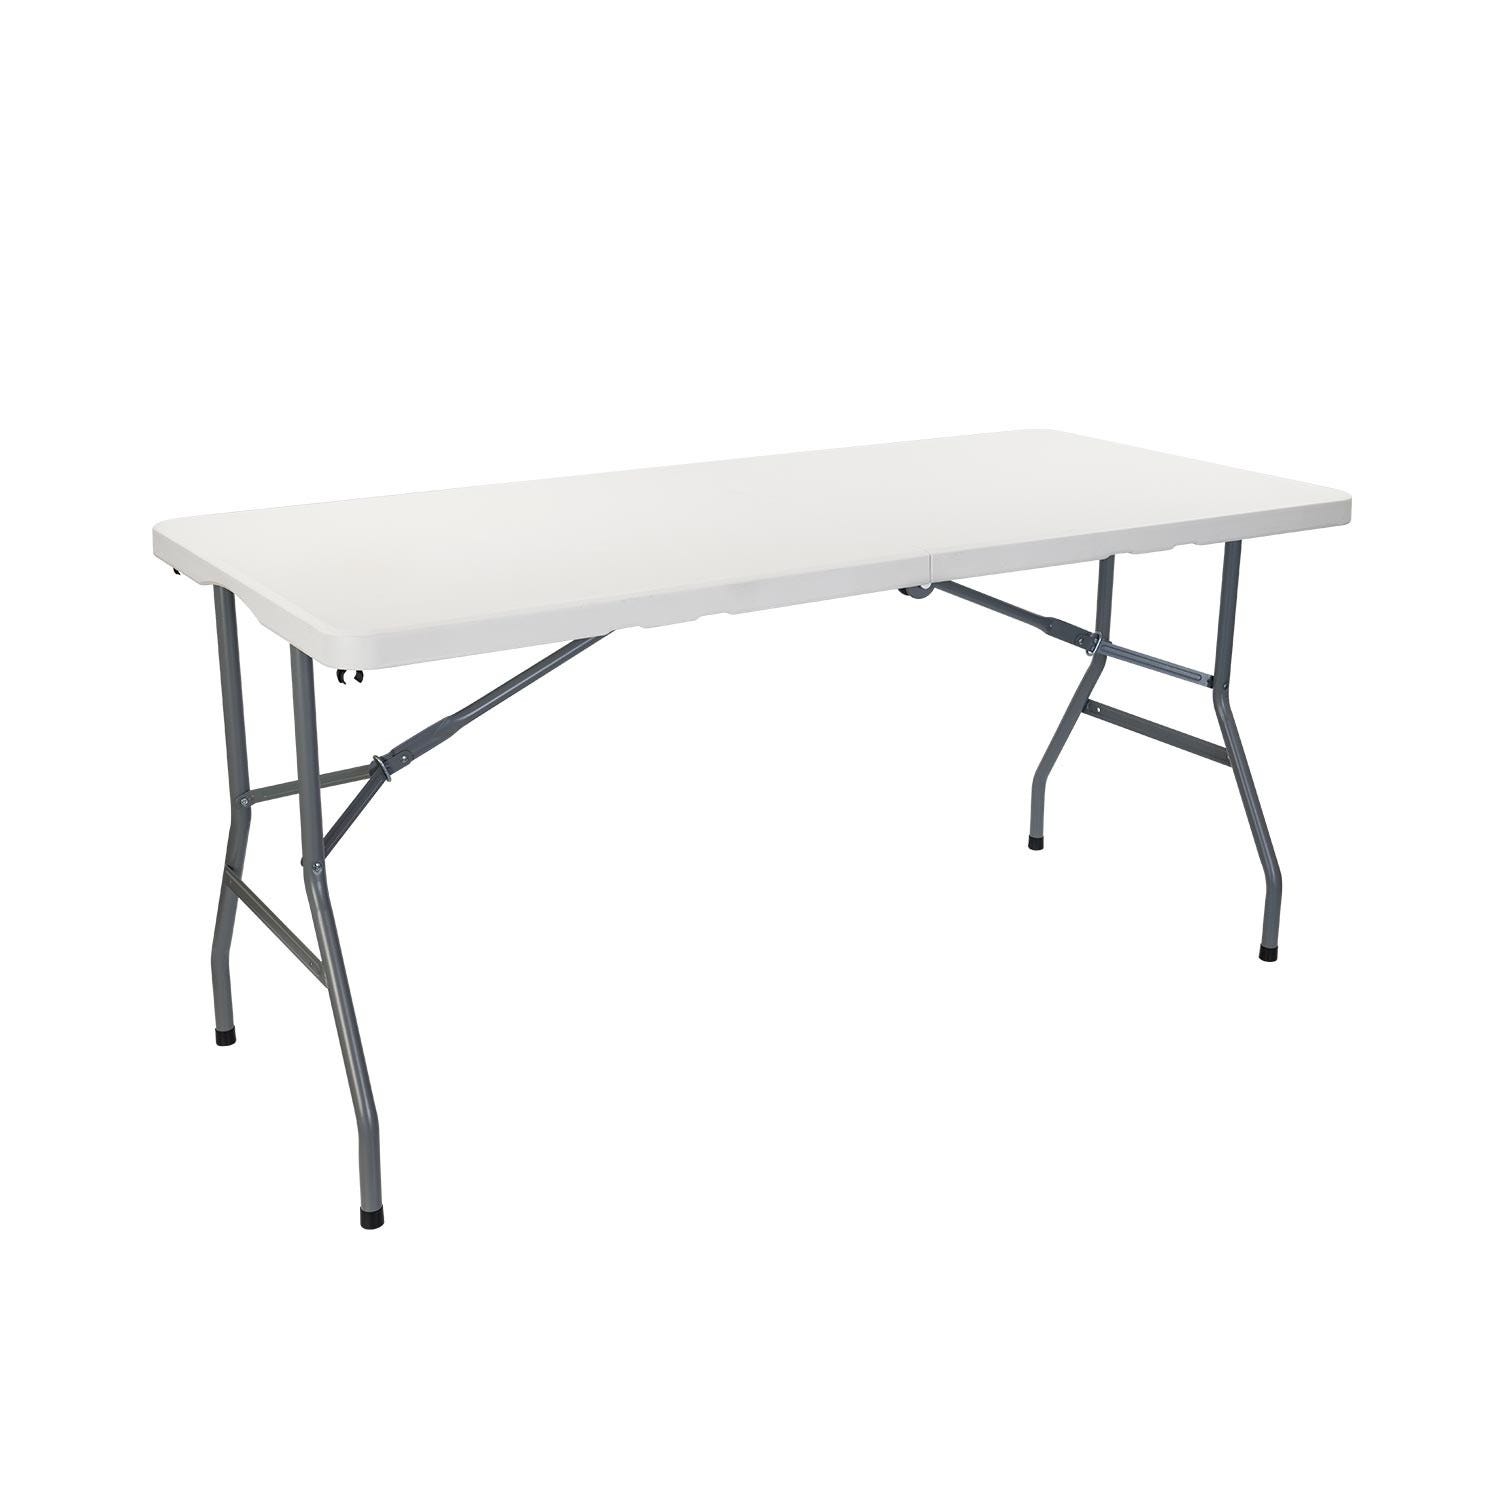 Table Pliante 150cm Rectangulaire Blanc Catering O91